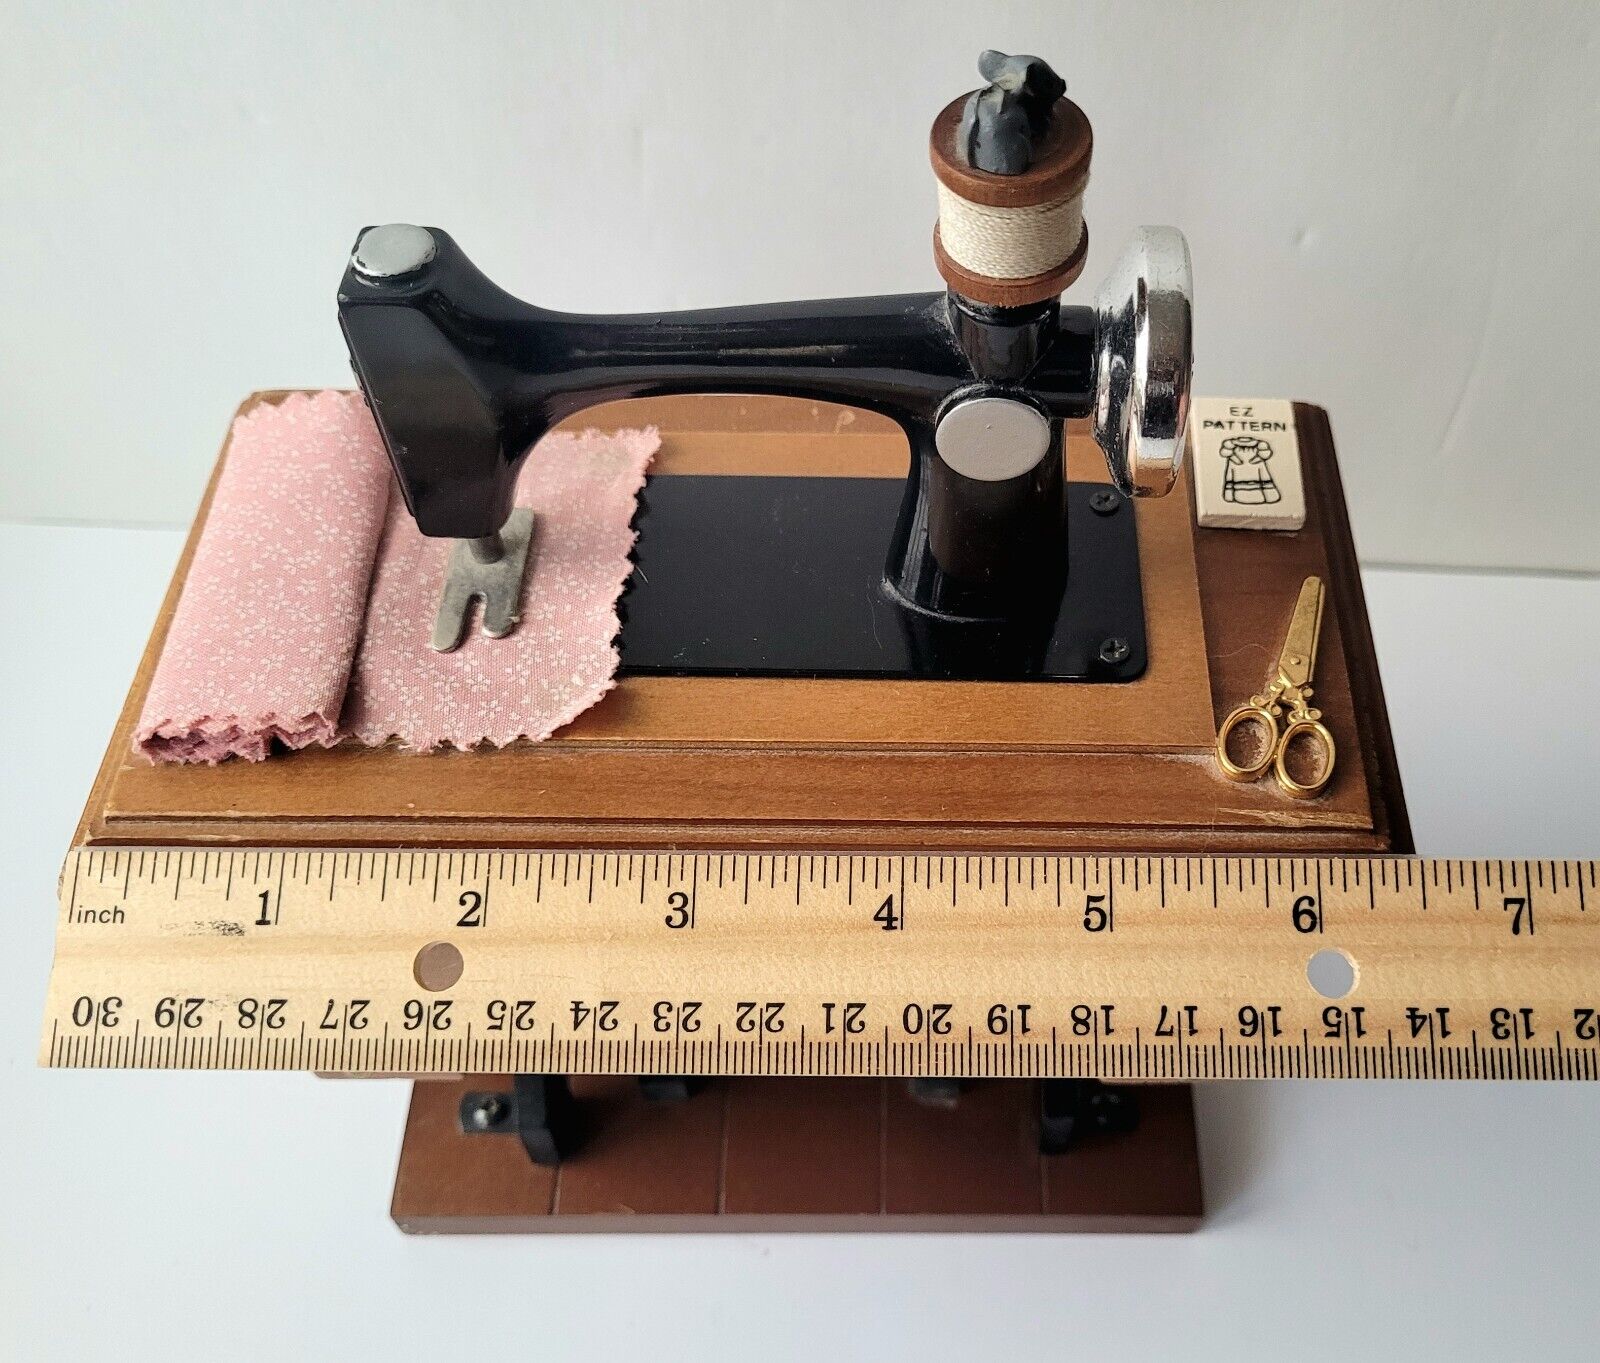 VTG Berkely Designs Music Box Mini Sewing Machine Mouse Plays Buttons & Bows